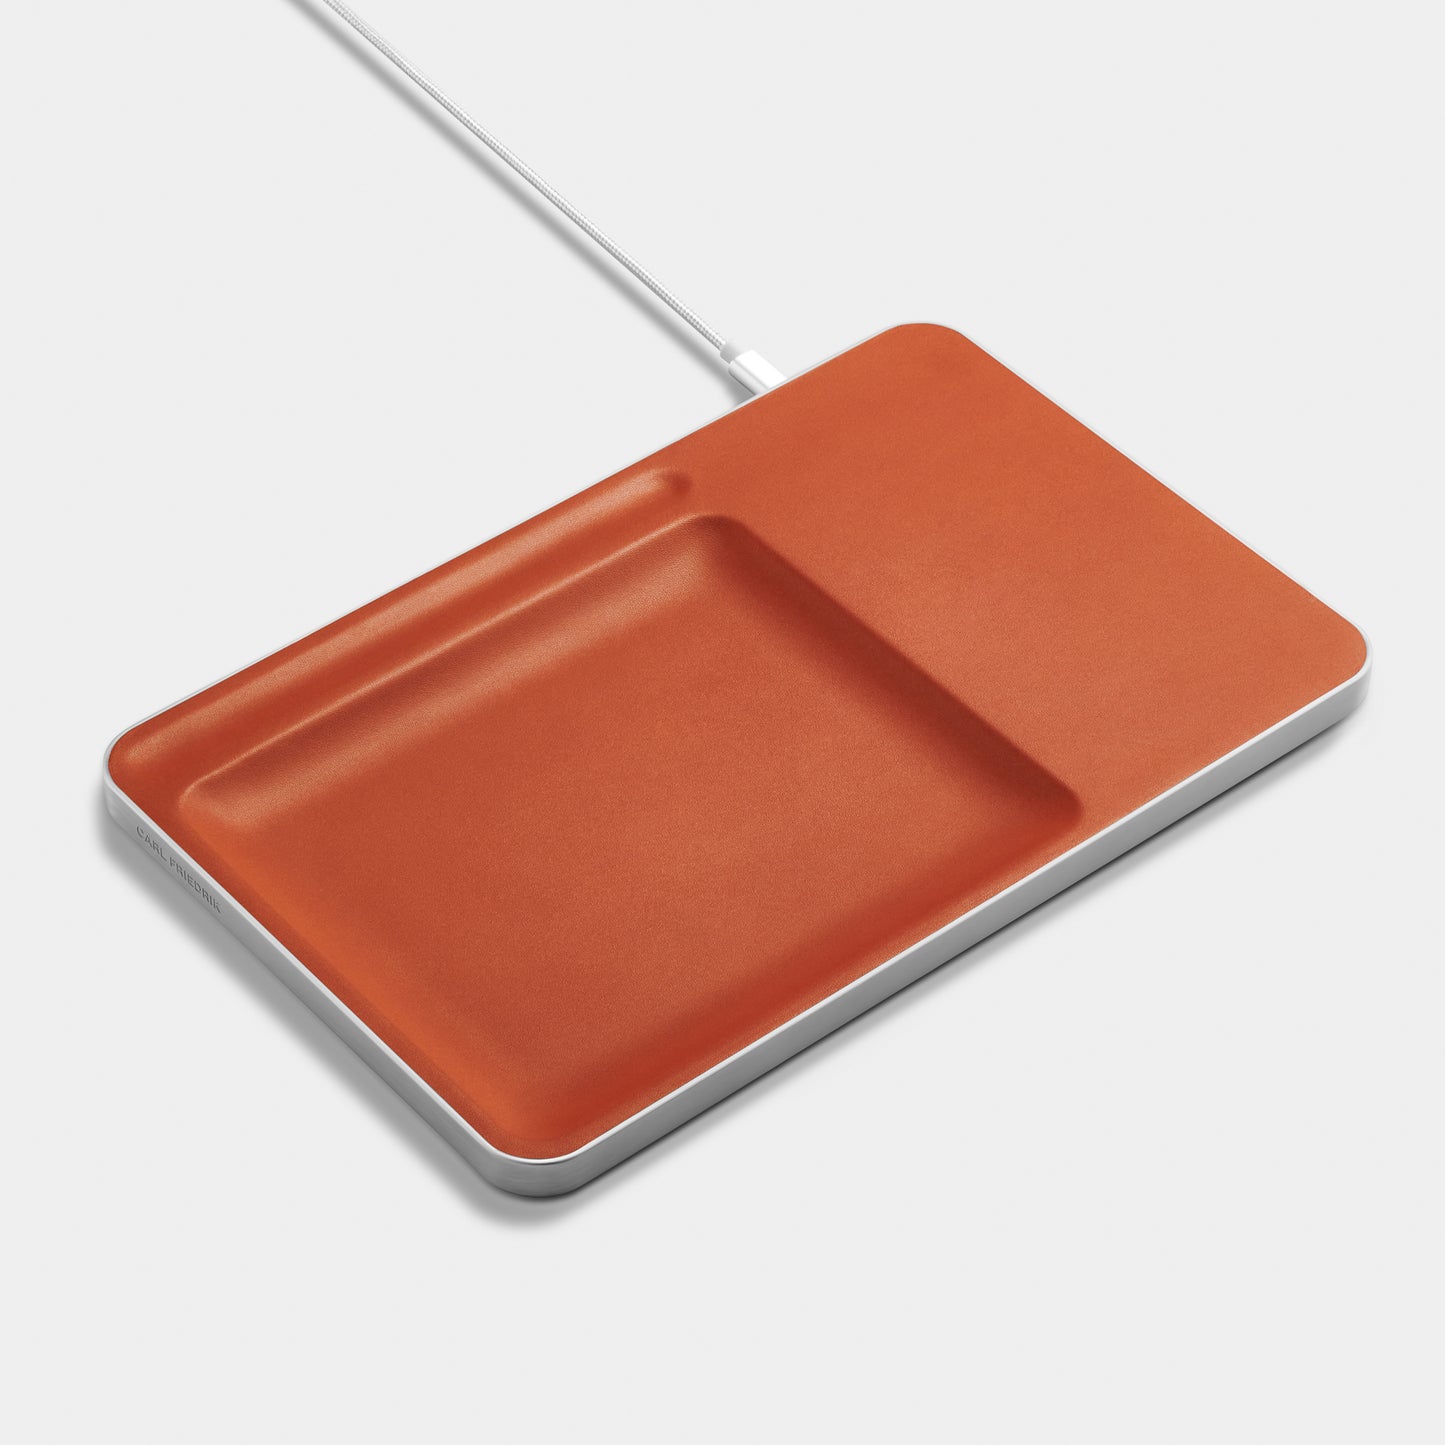 Cognac Leather charging station over white background